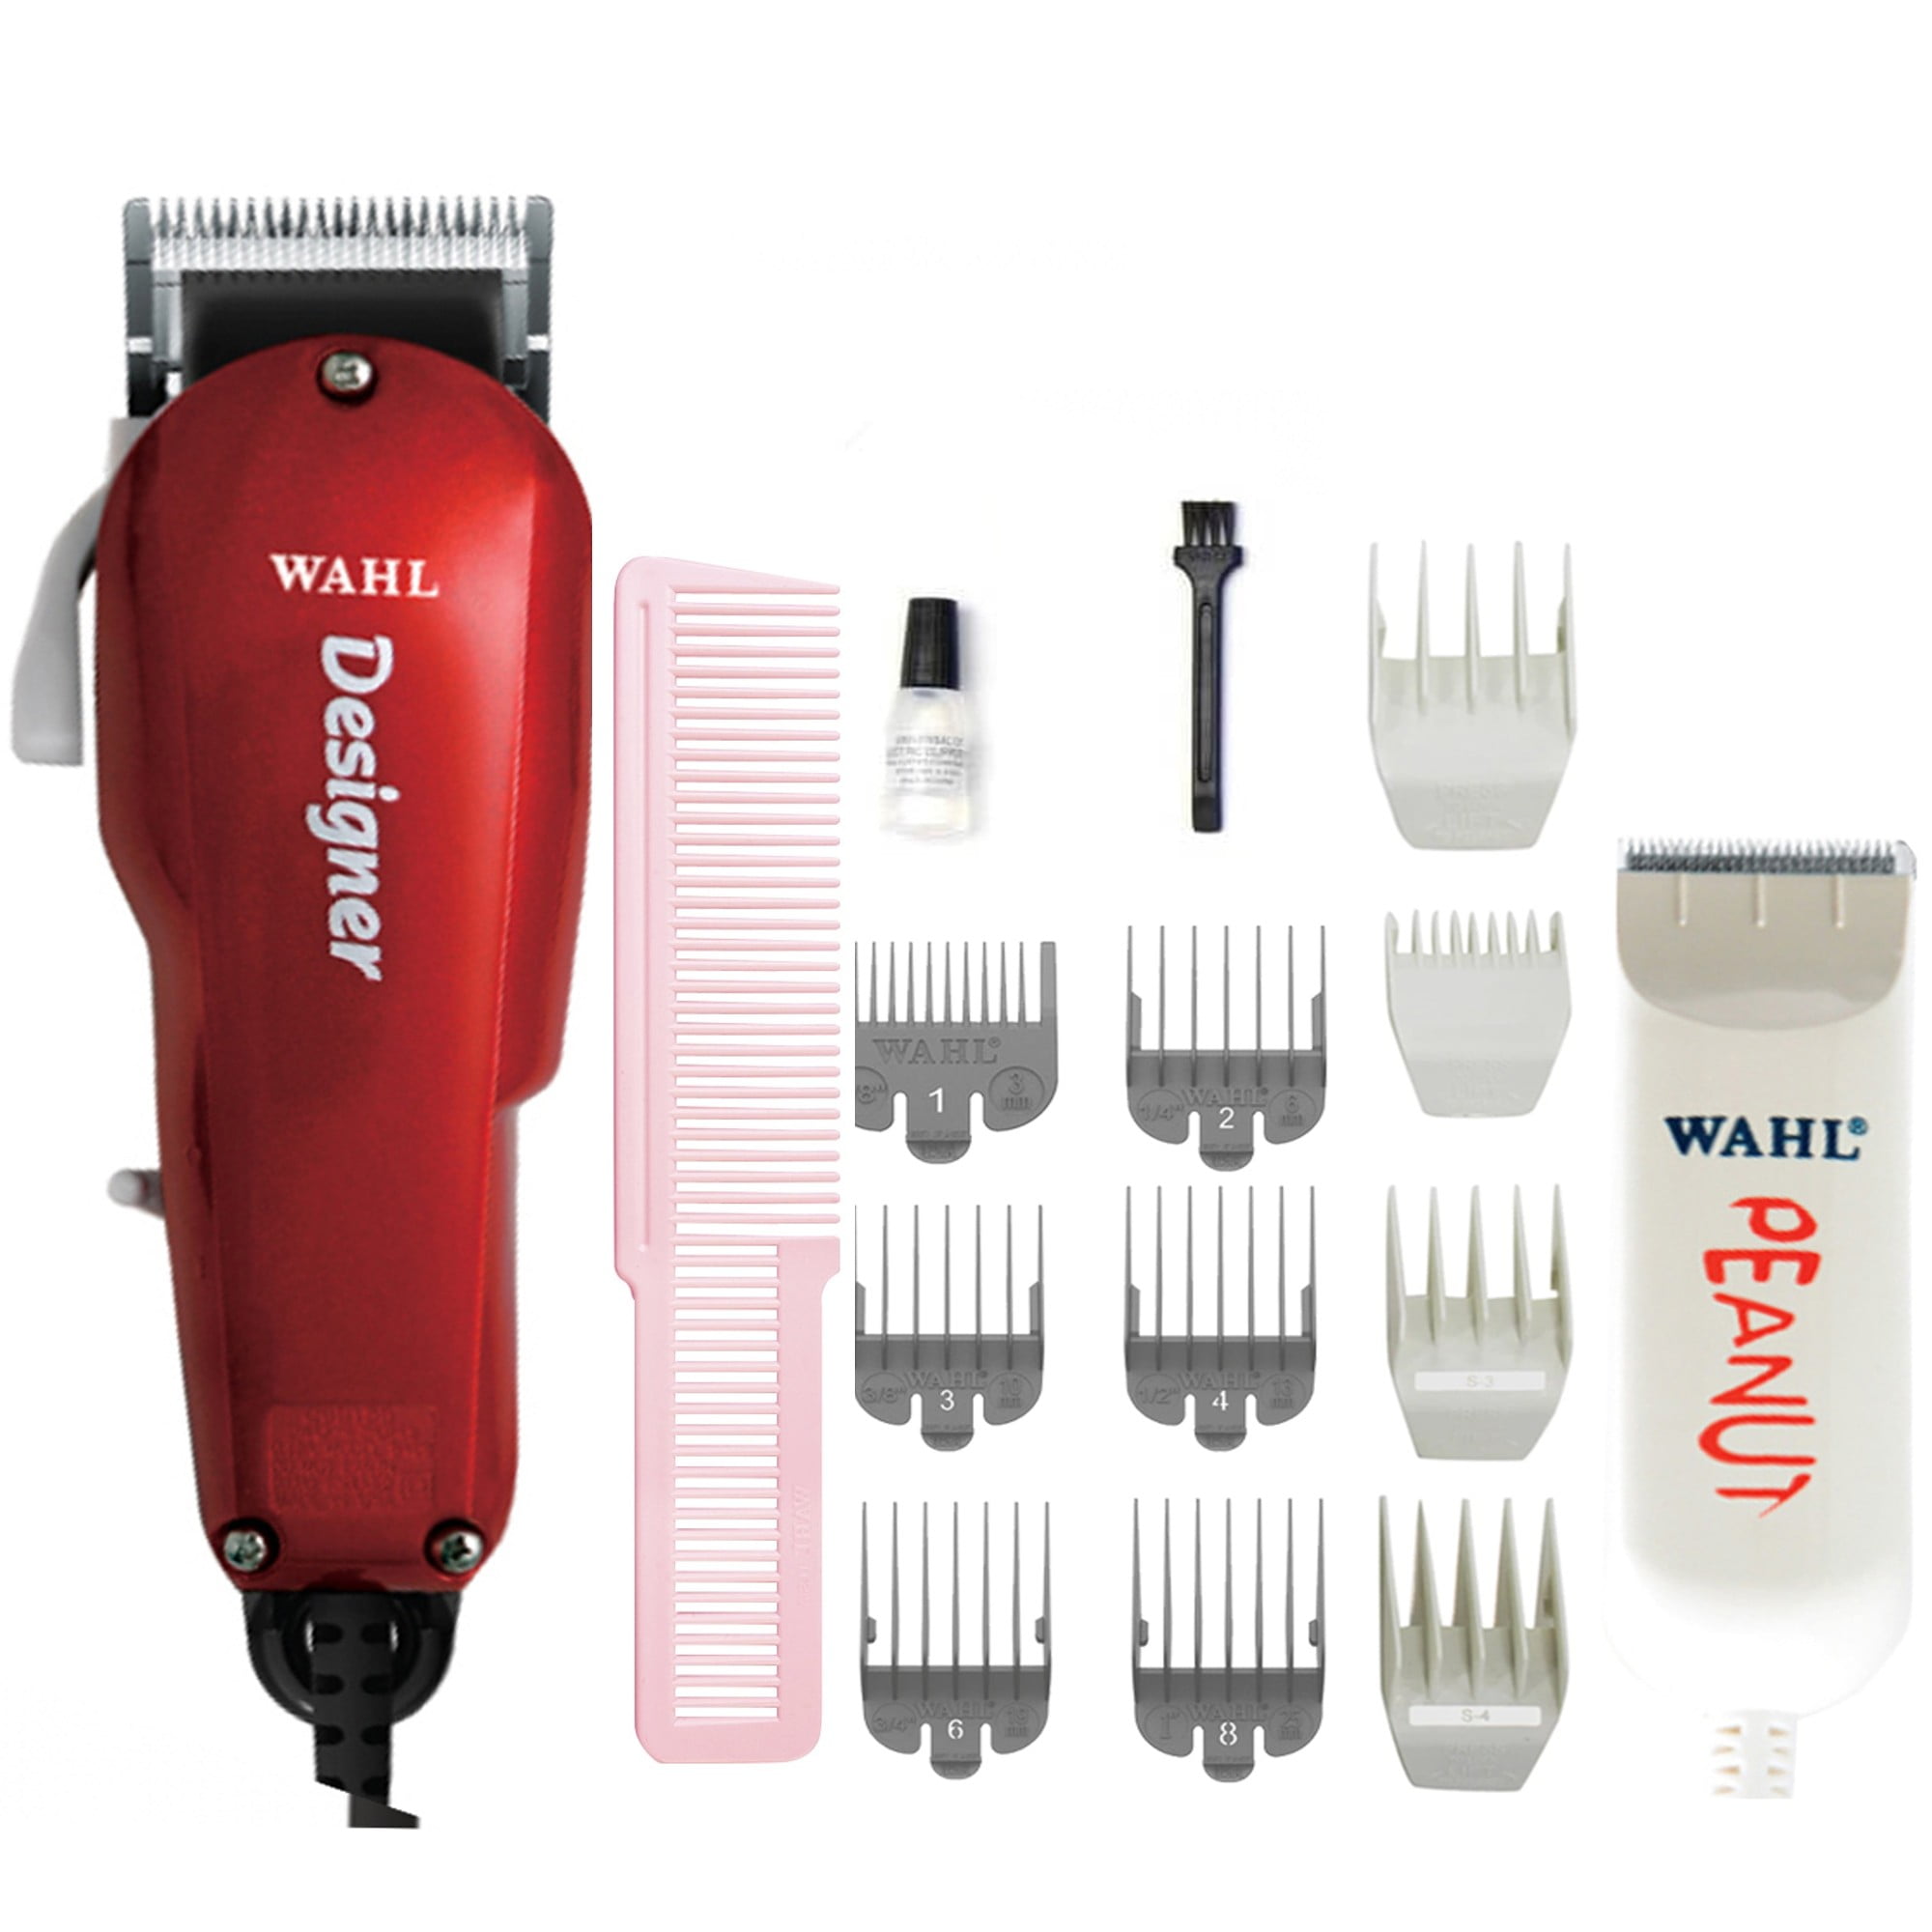 Wahl Peanut Cordless Trimmer with 4-Attachments by Wahl並行輸入